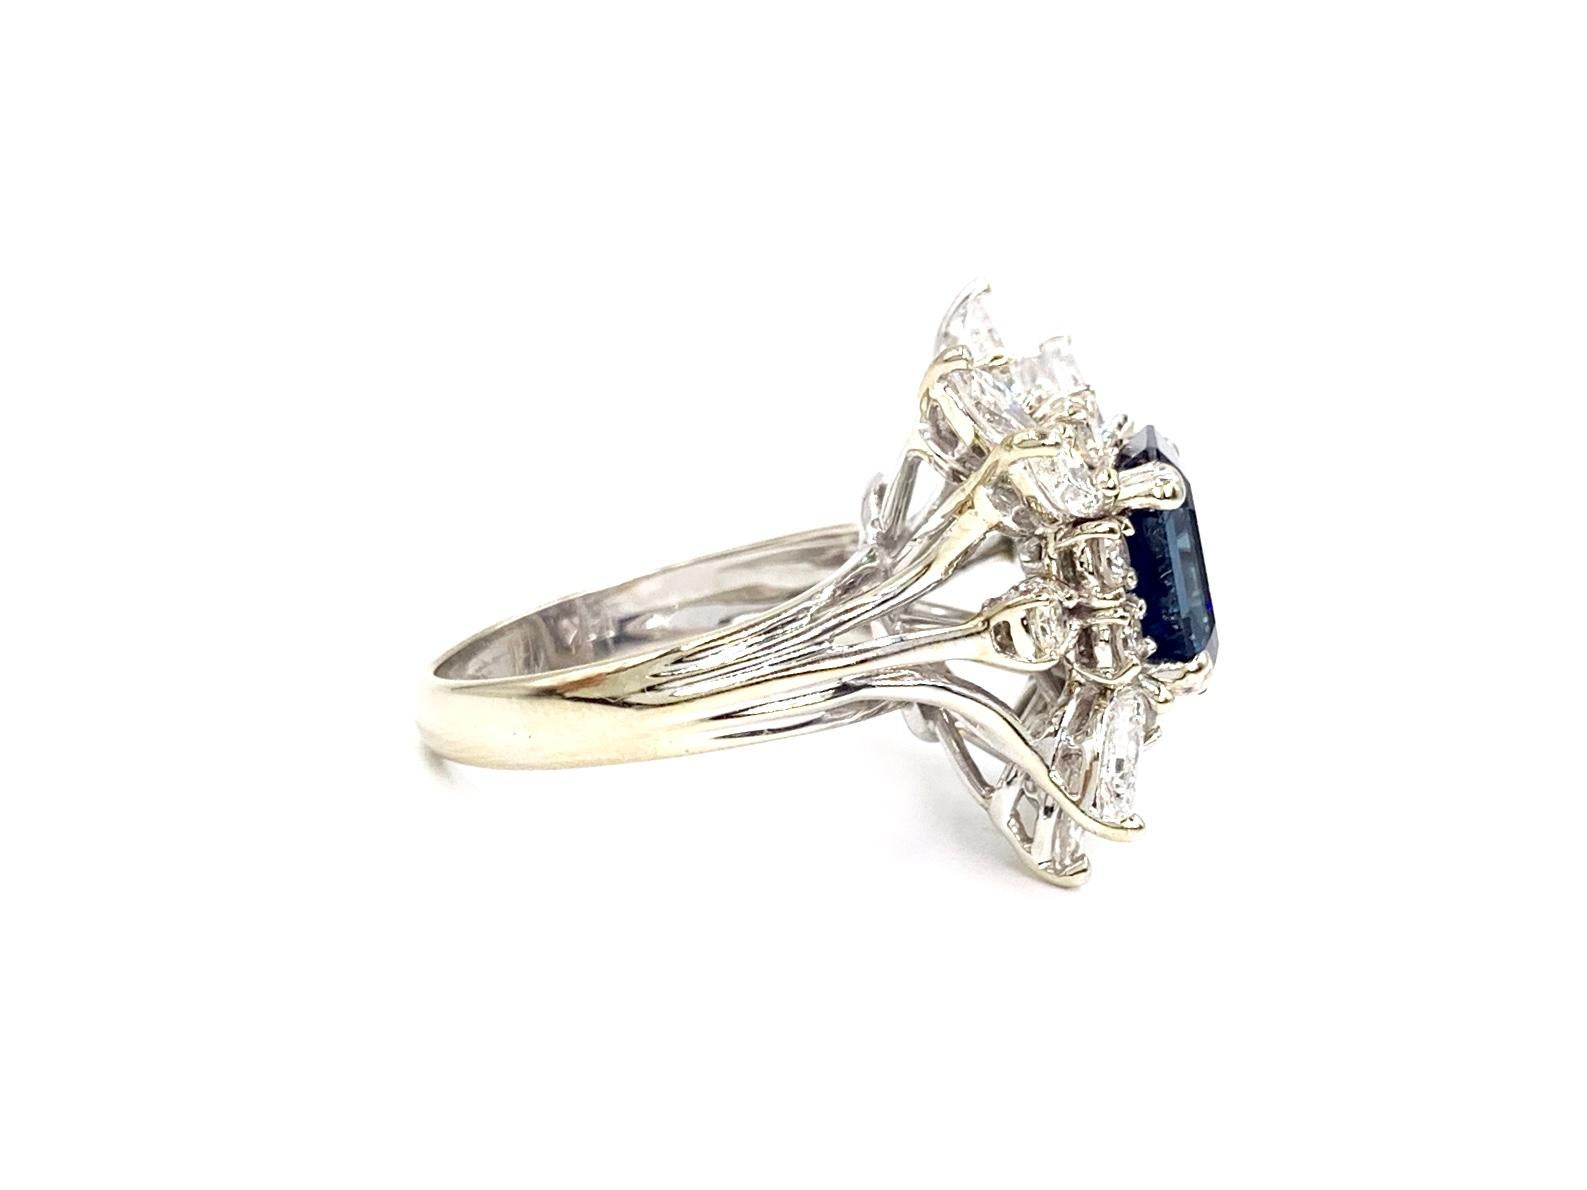 Retro Vintage White Gold 2.80 Carat Sapphire and Diamond Cocktail Ring For Sale